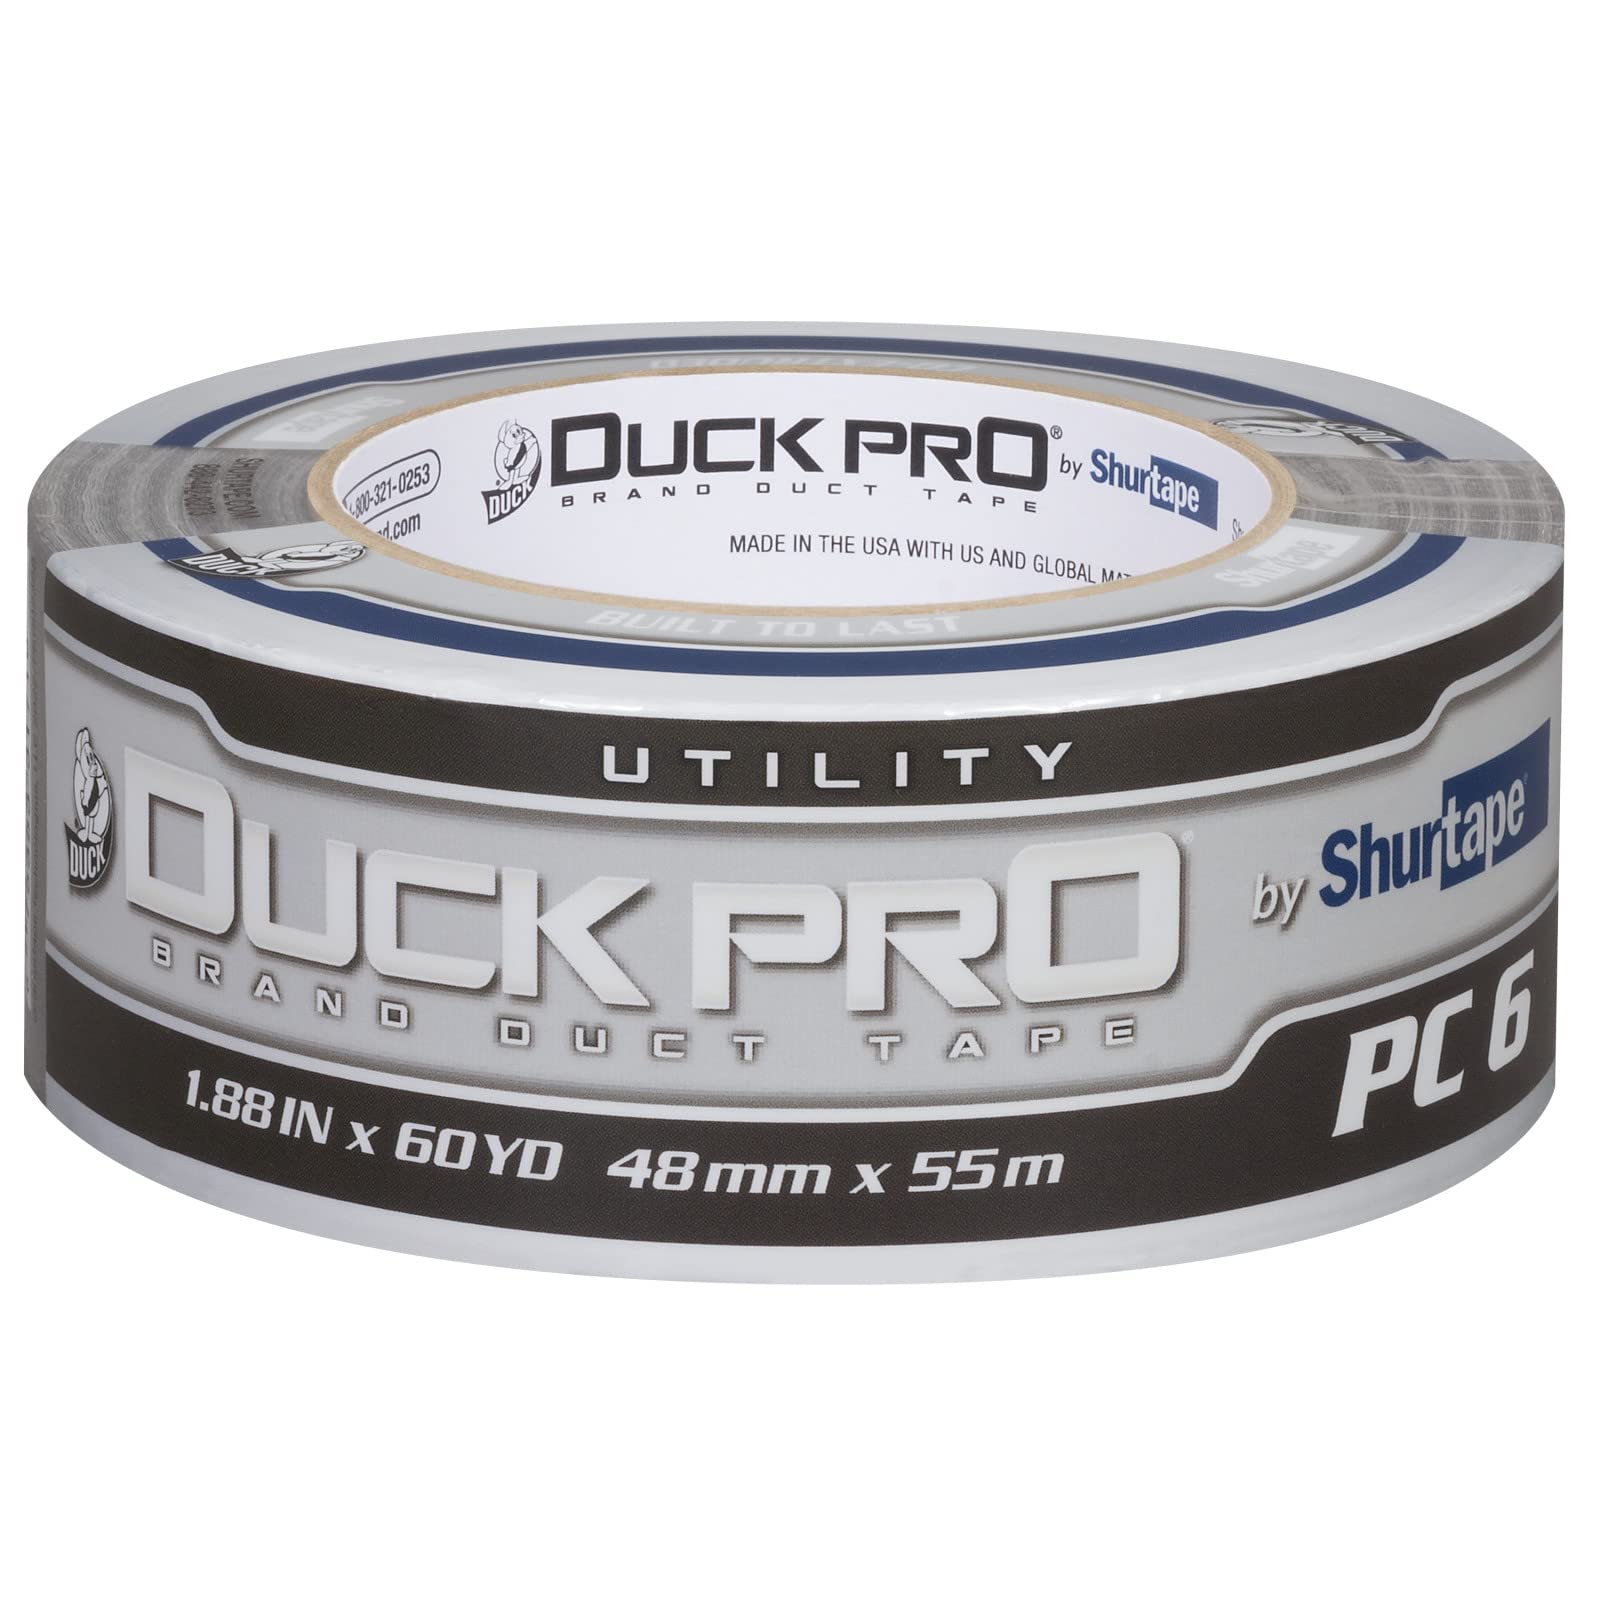 DUCK PRO BY SHURTAPE PC 6 ECONOMY GRADE COEXTRUDED CLOTH DUCT TAPE  SILVER  48MM X 55M